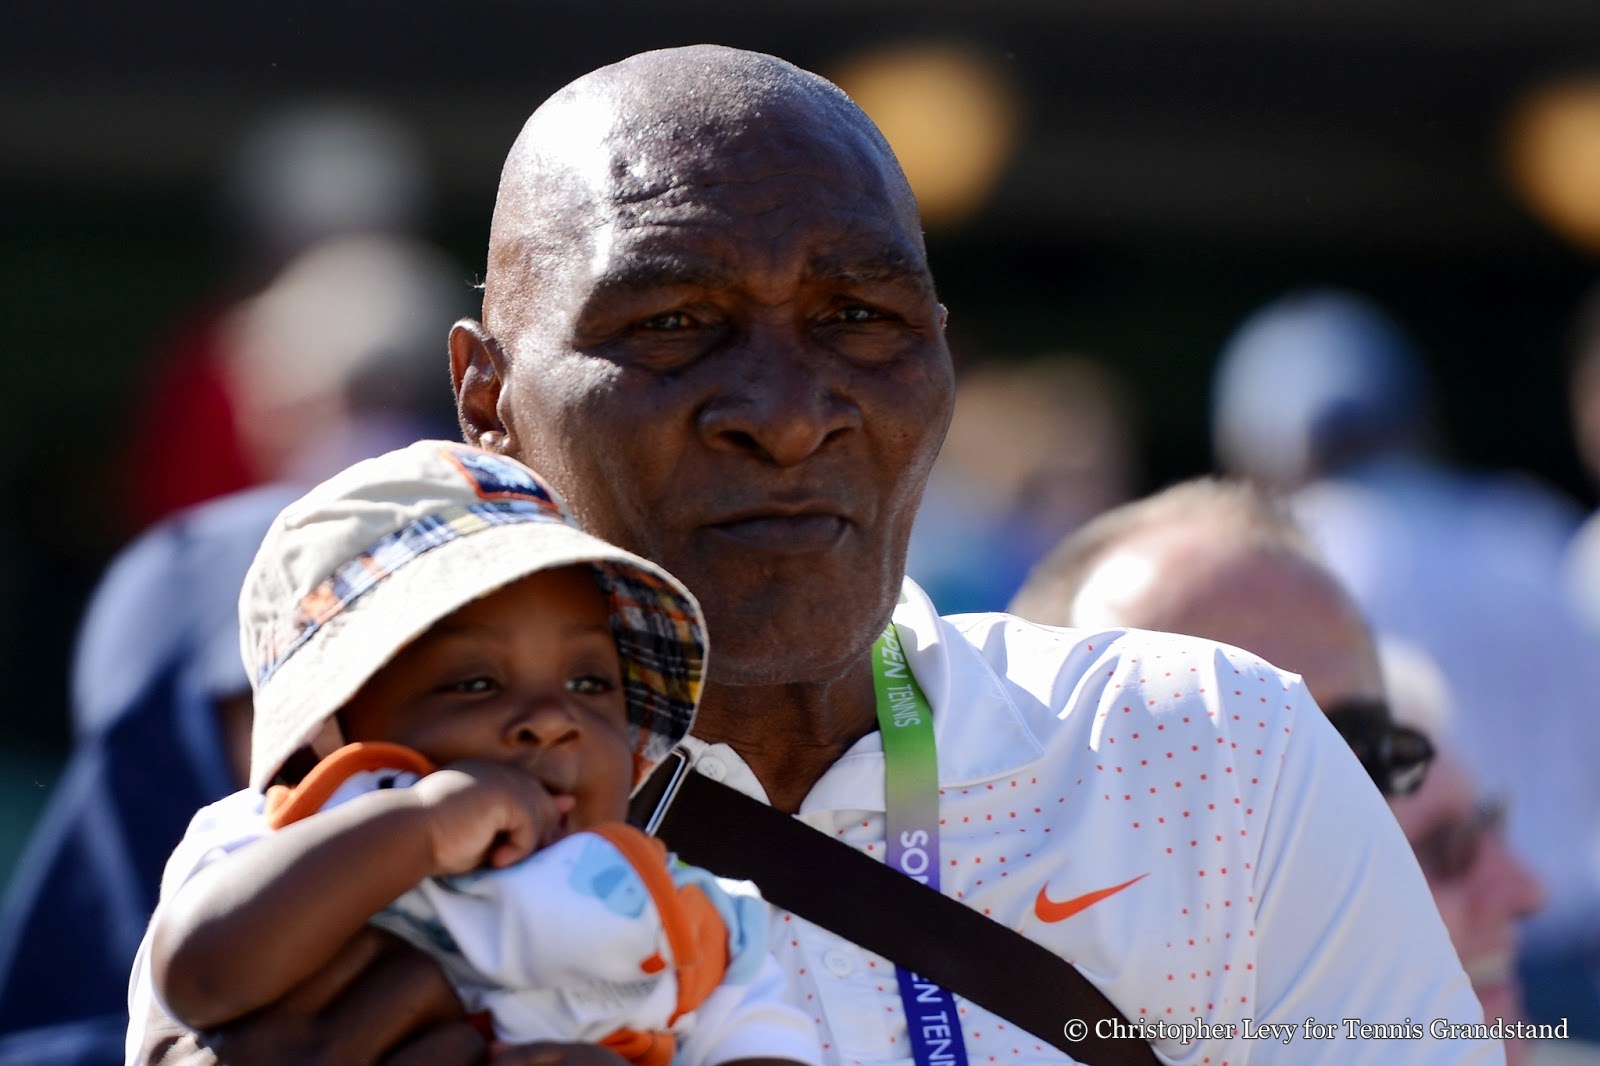 JUST REVEALED! Father of Serena and Venus Williams Had a Serious Stroke While ...1600 x 1066